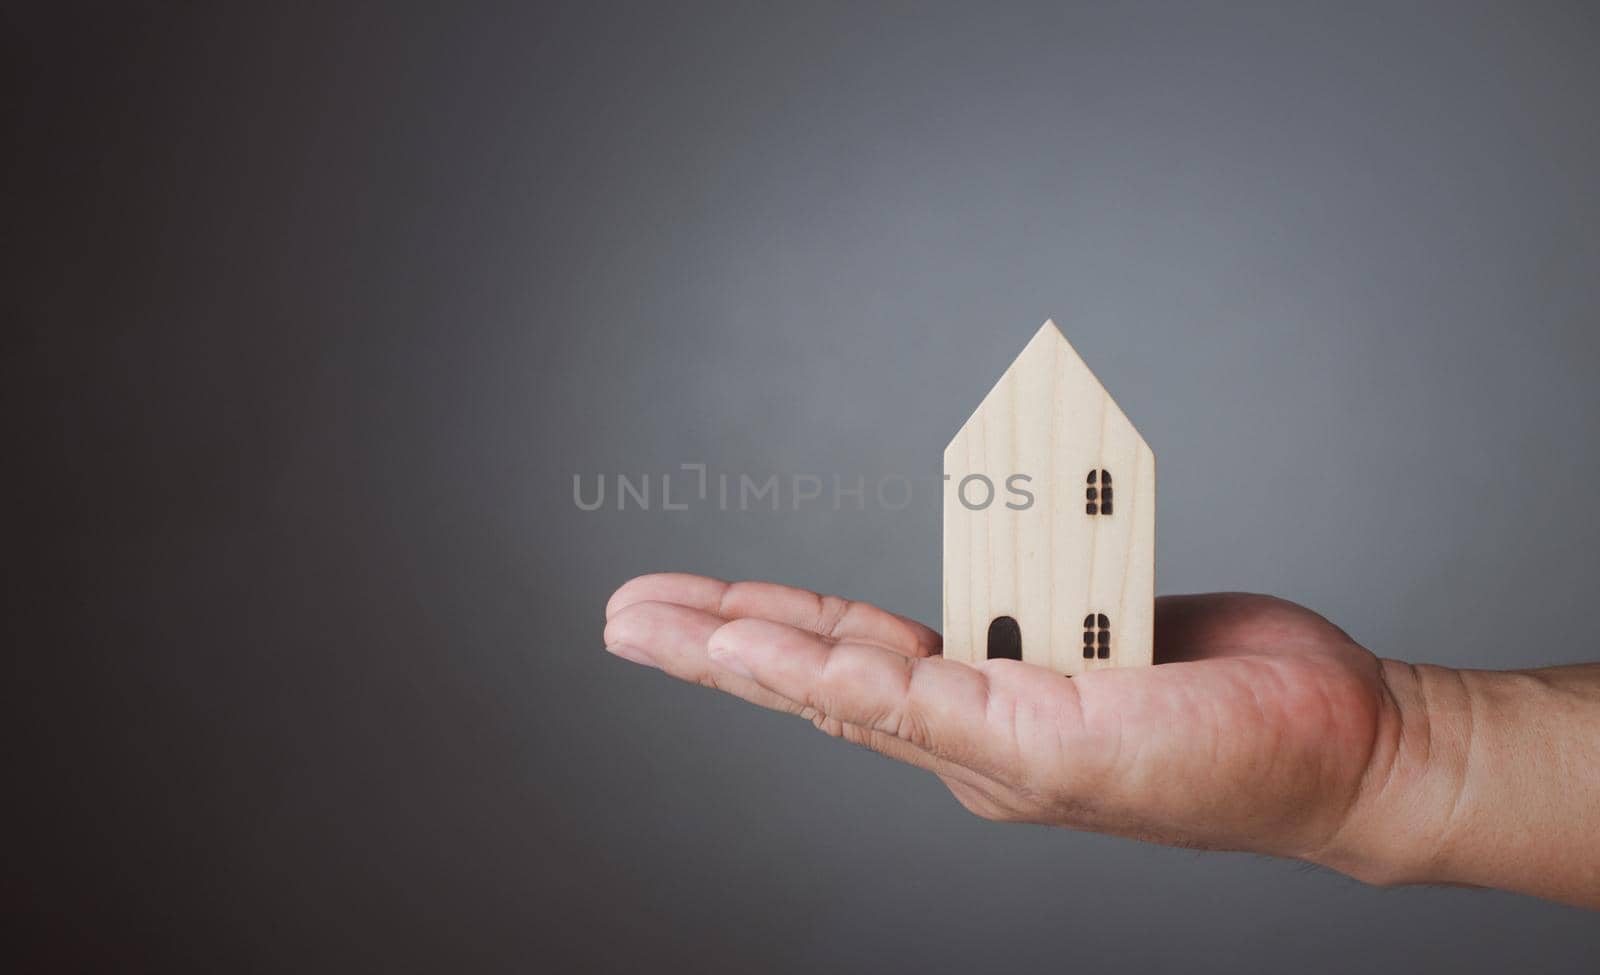 Concept of selling a house. A hand is holding a model house on a gray background. Real estate agent offer house, property insurance and security, affordable housing concepts, home insurance broker agent, salesman person. by Unimages2527